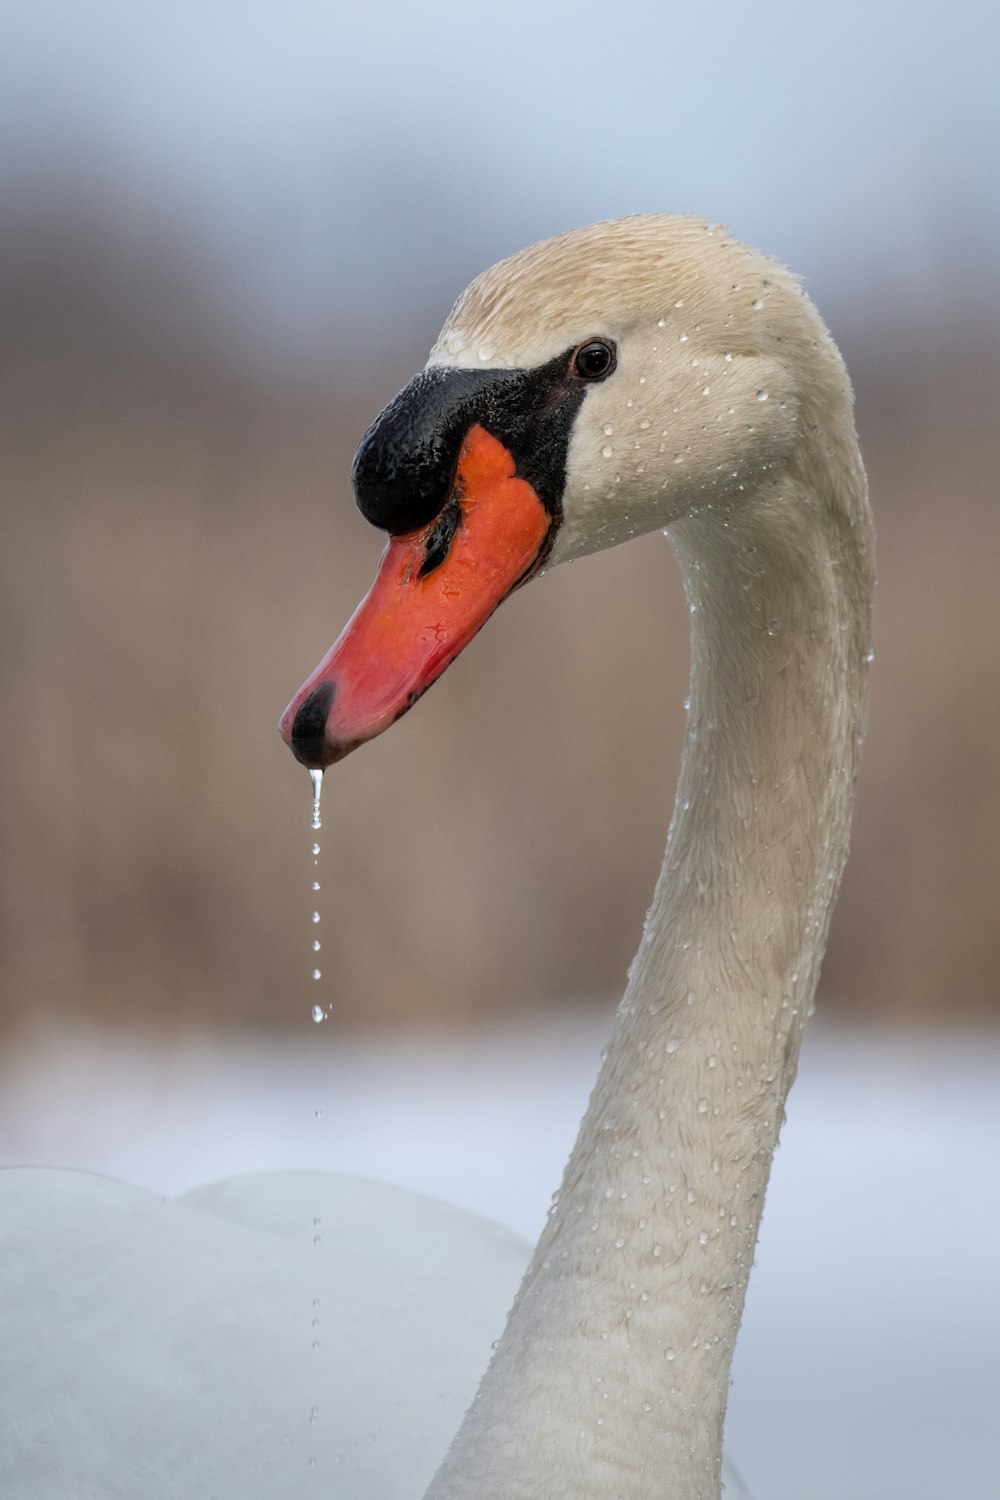 a close up of a swan with a drop of water in its beak